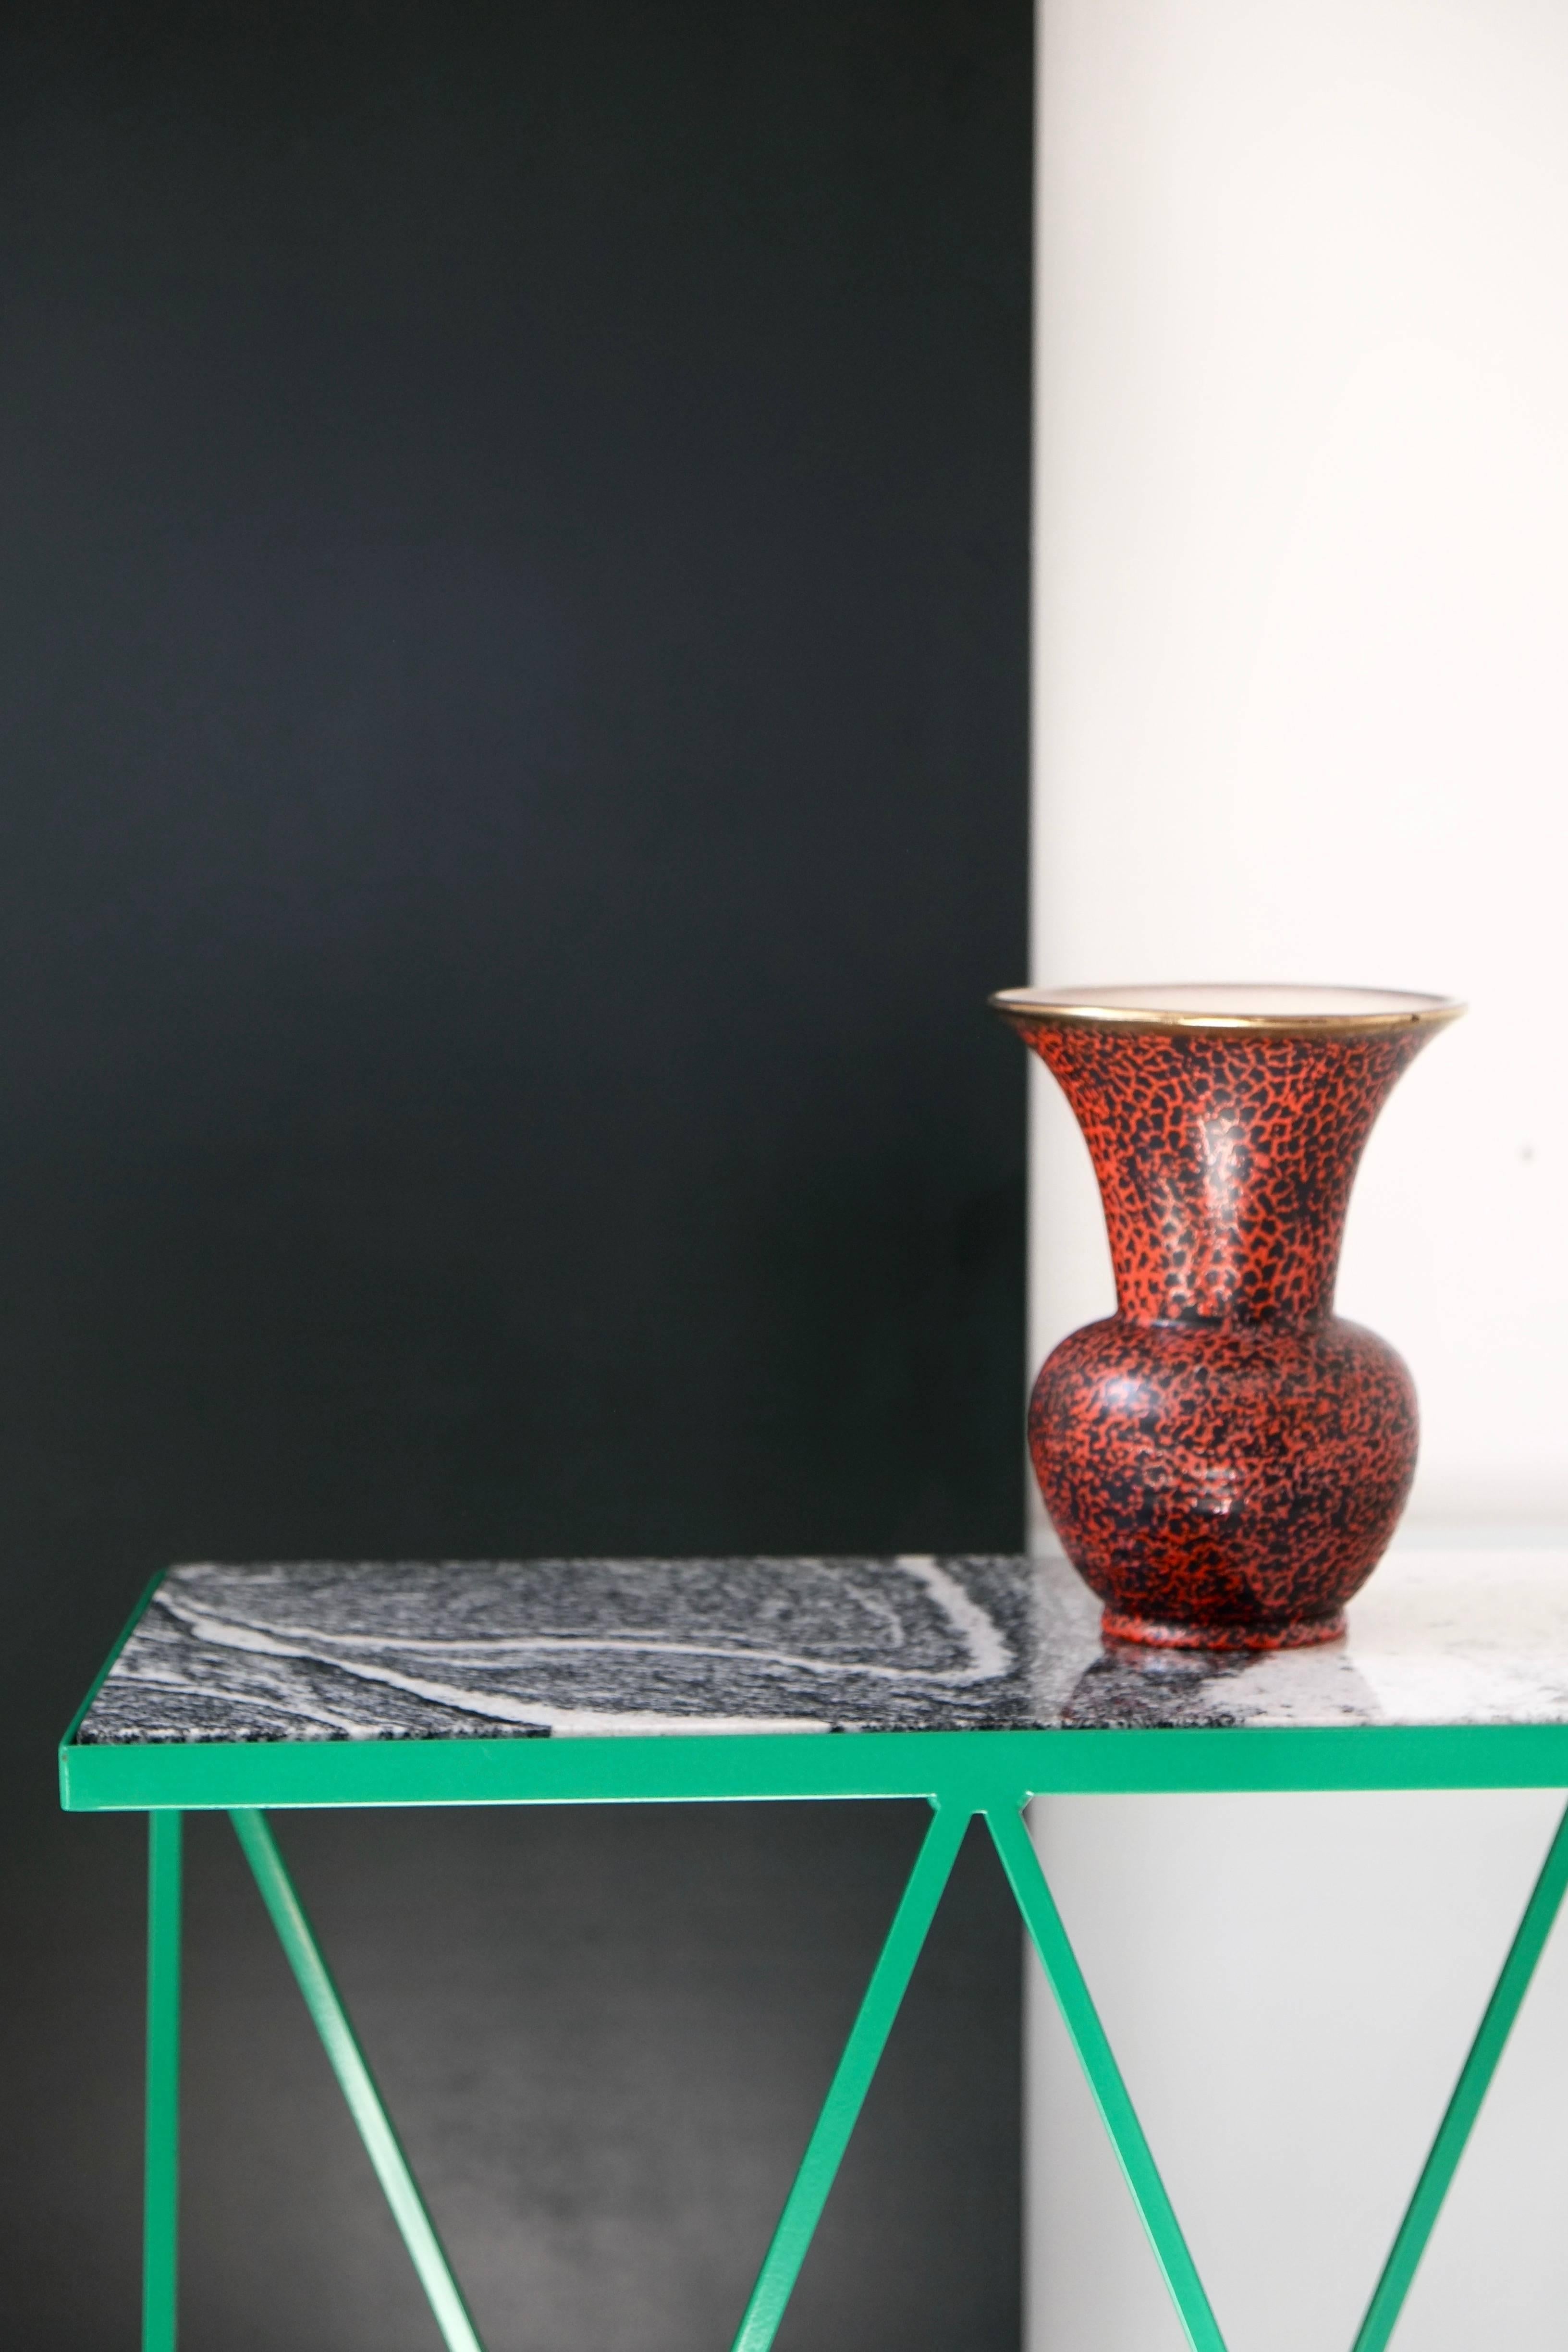 Polished Luxury Green Giraffe Console Table with Granite Top - Customisable  For Sale